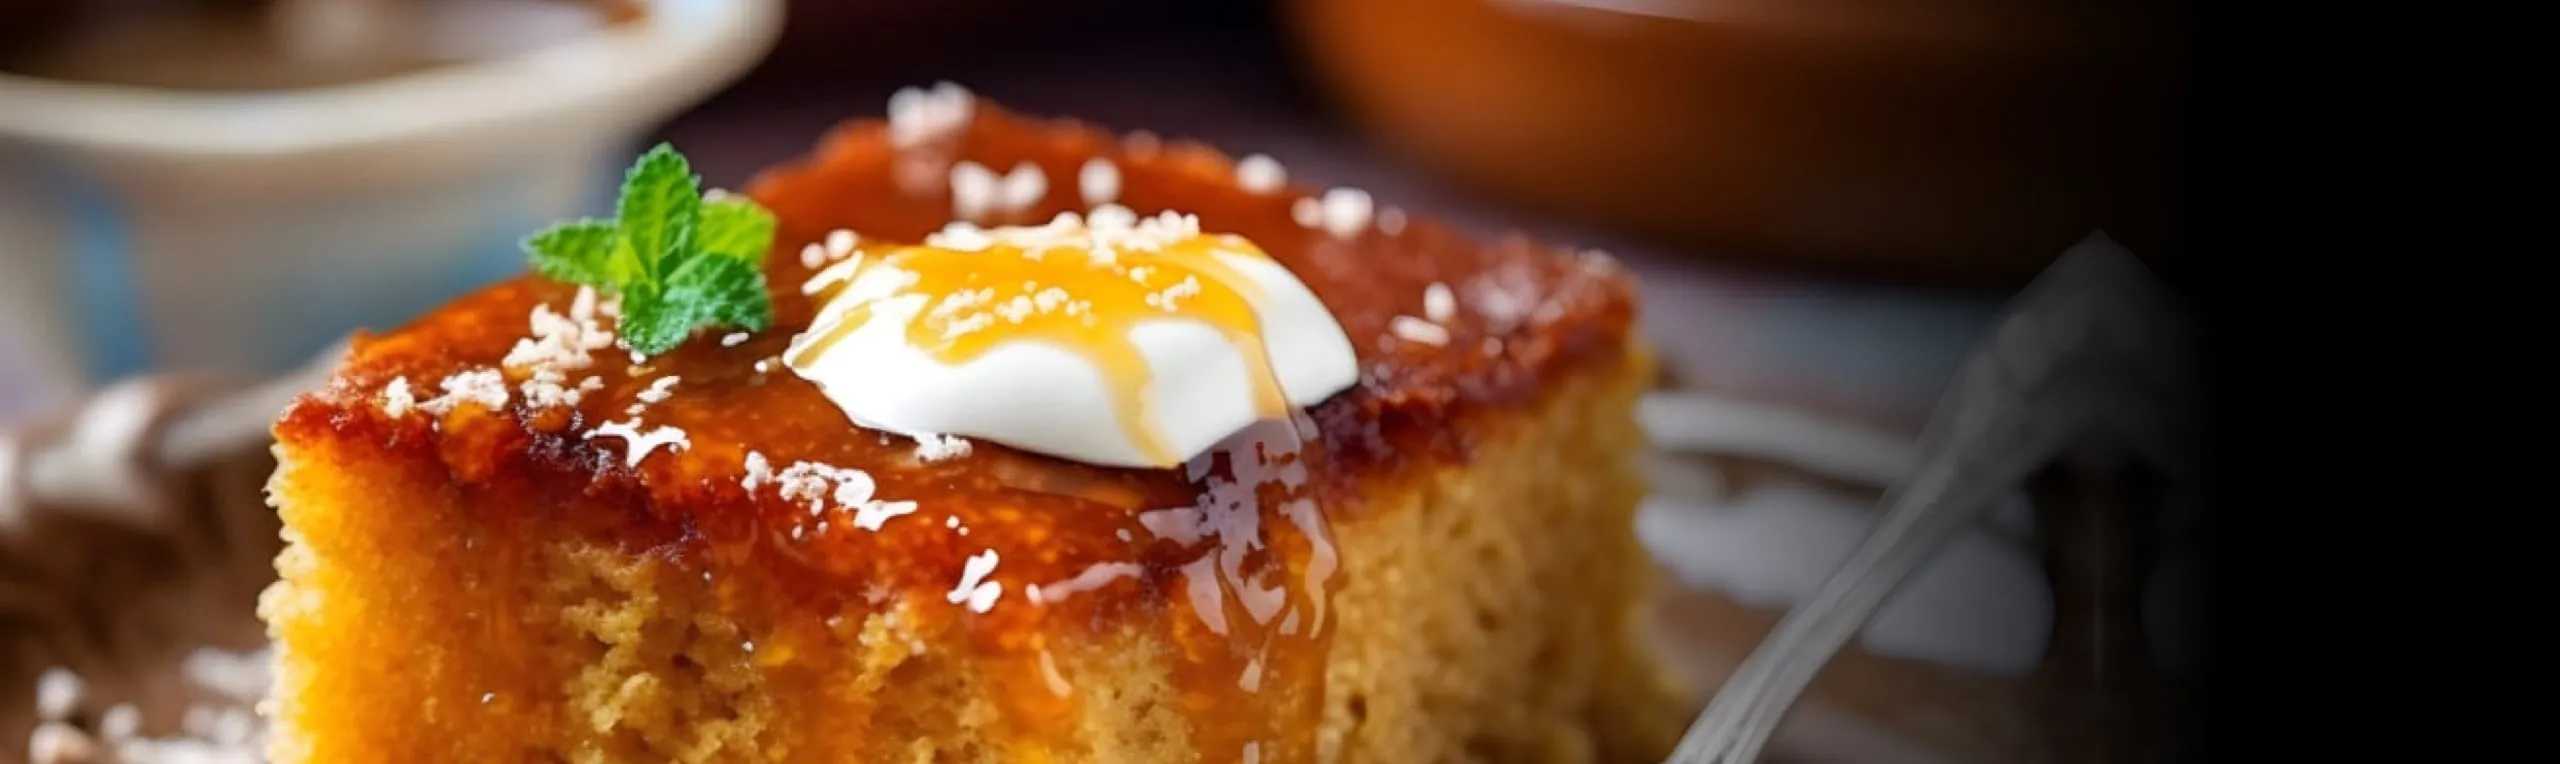 Featured   Malva Pudding Food for the Soul   Desktop